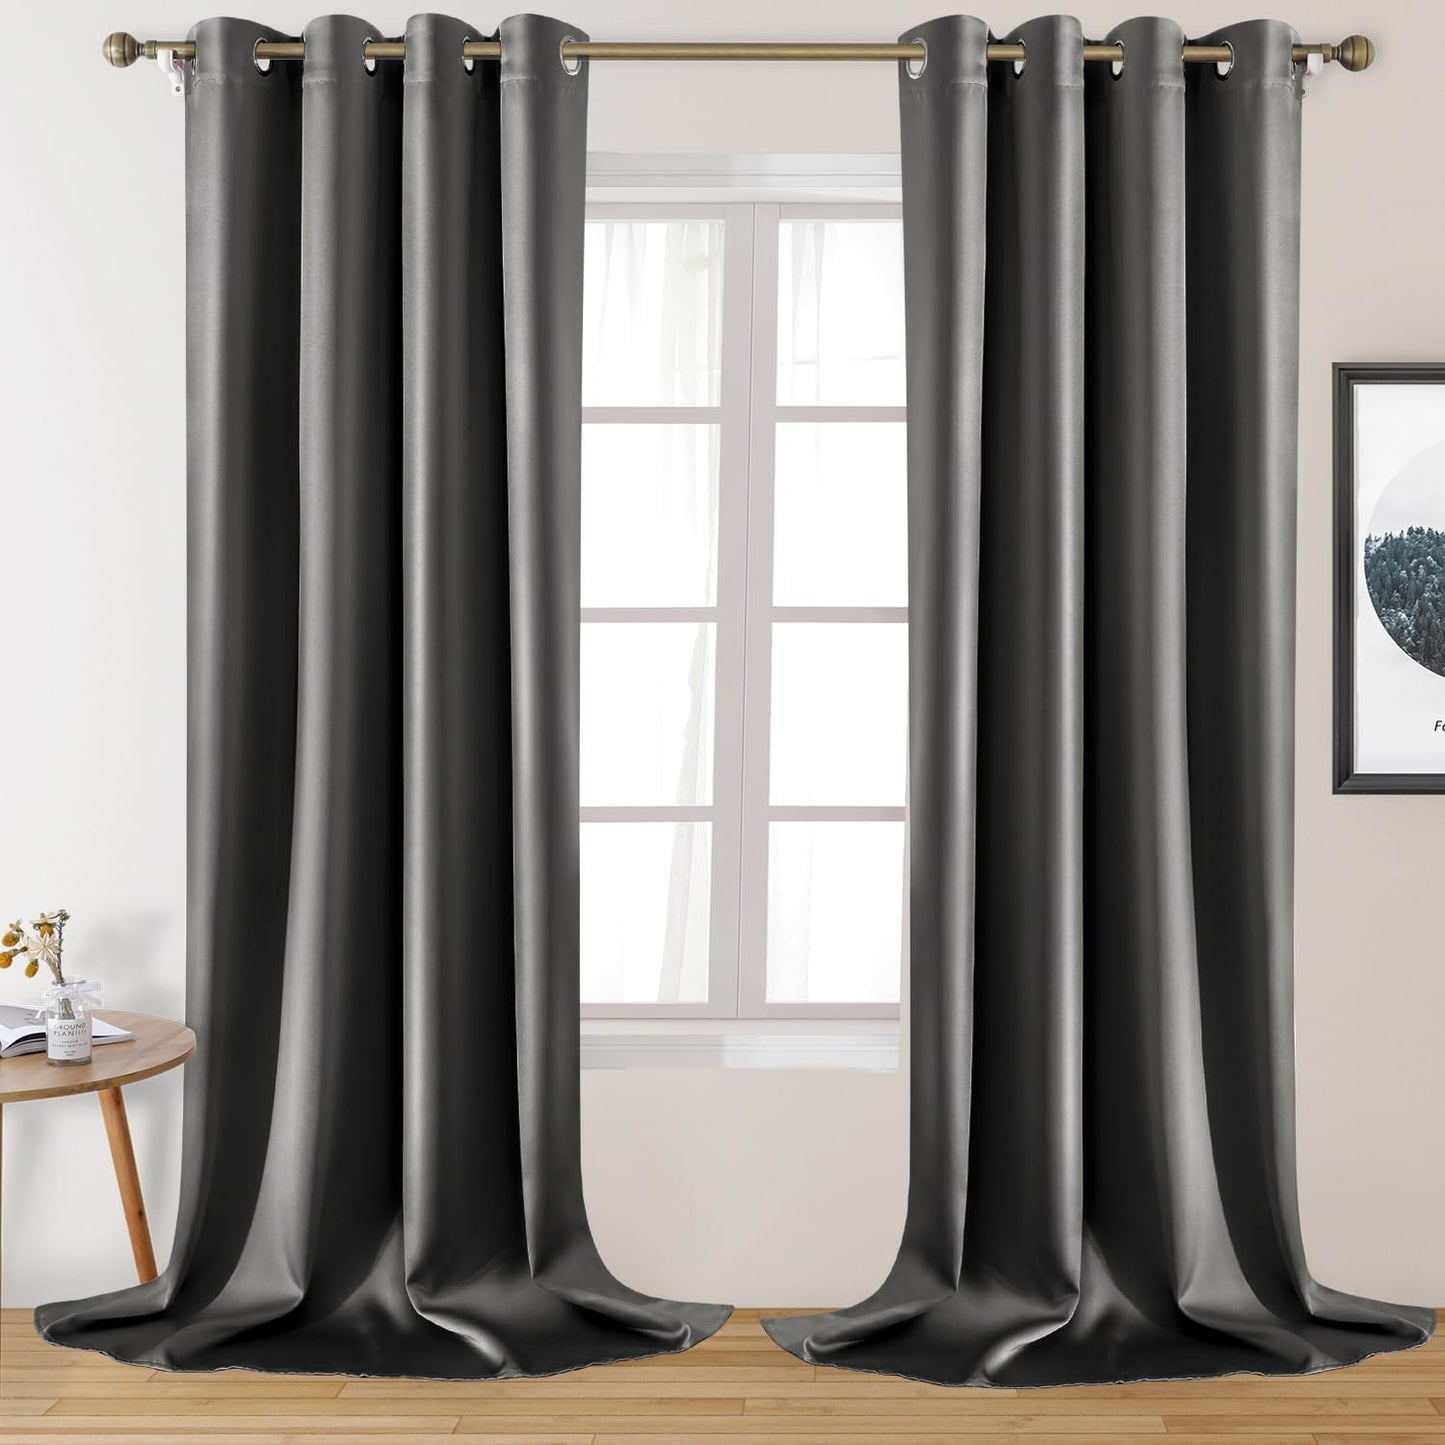 HOMEIDEAS Gold Blackout Curtains, Faux Silk for Bedroom 52 X 84 Inch Room Darkening Satin Thermal Insulated Drapes for Window, Indoor, Living Room, 2 Panels  HOMEIDEAS Dark Grey 52" X 108" 